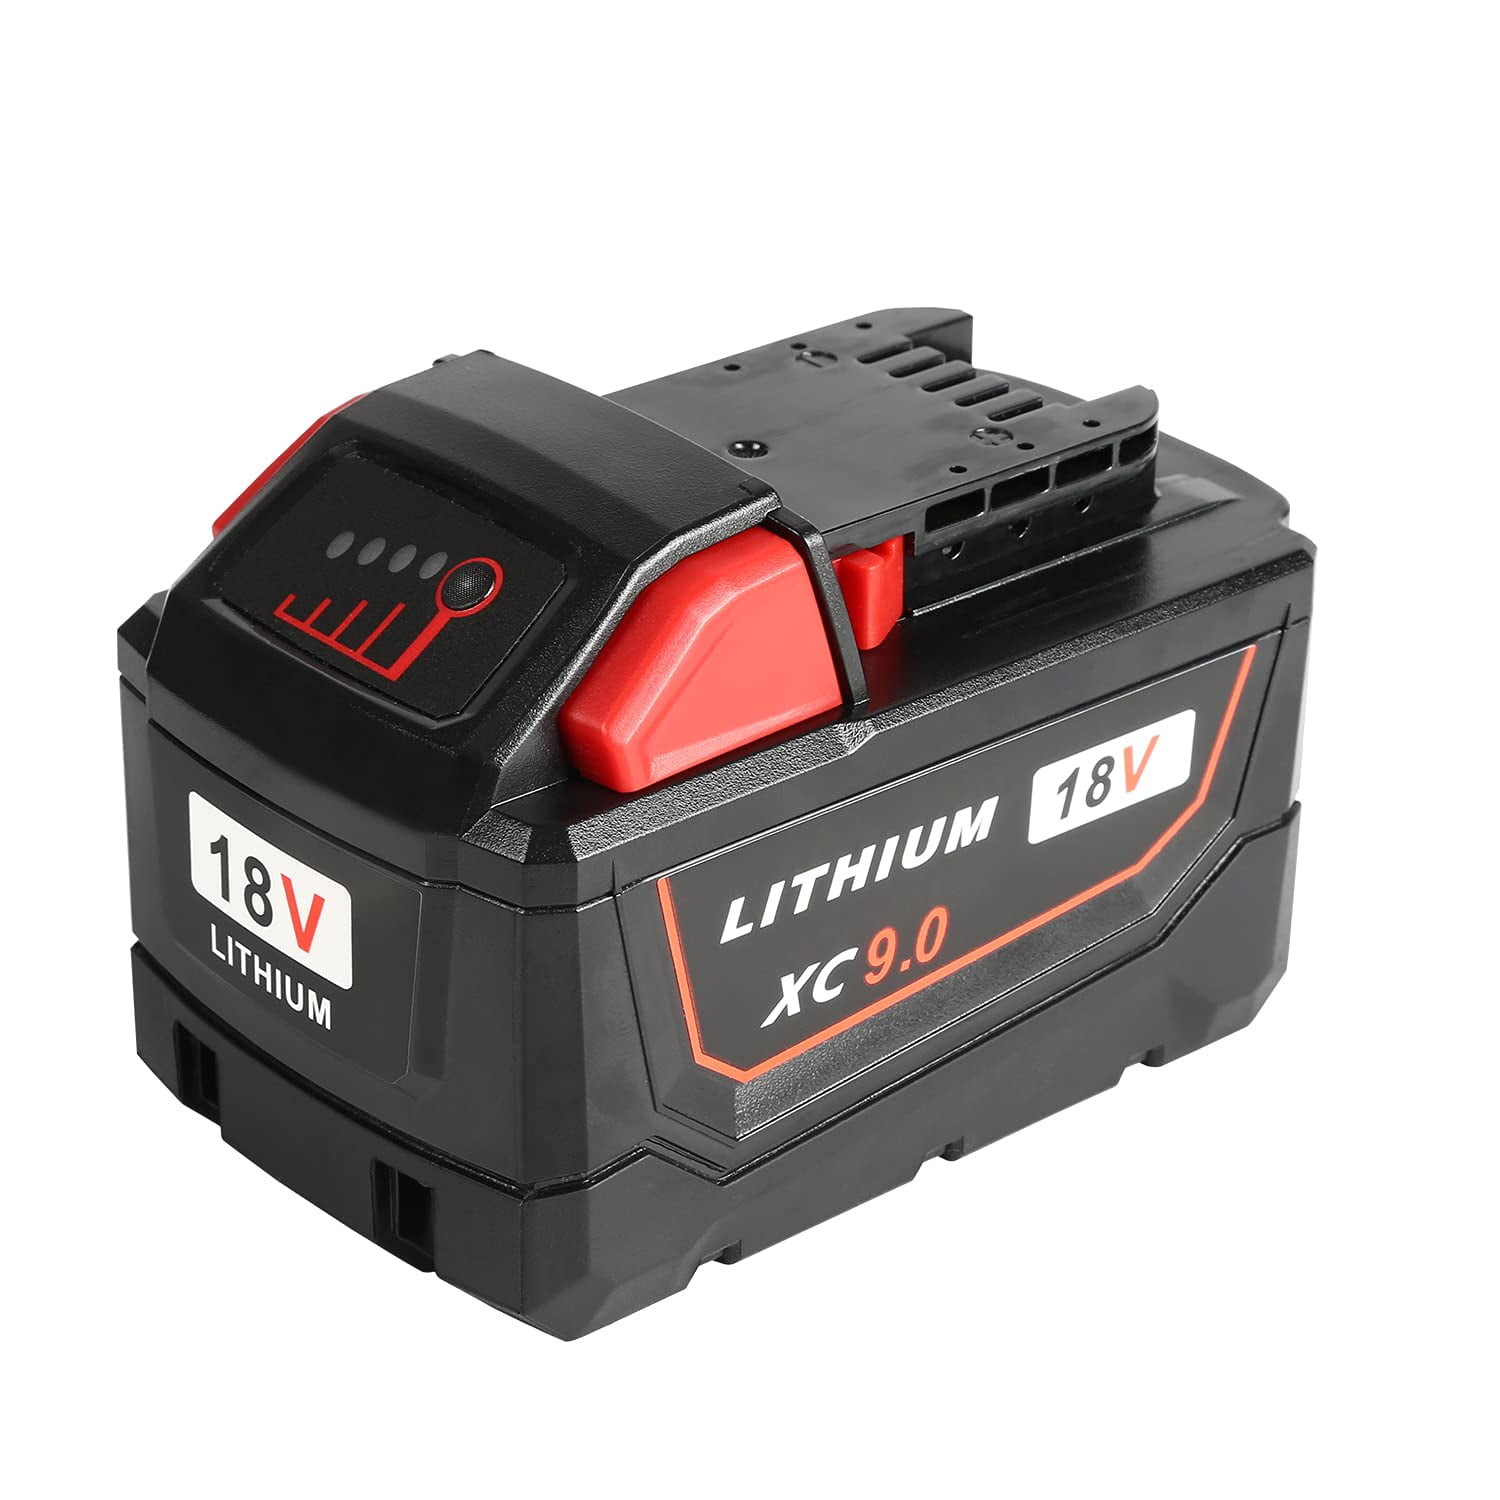 M18 18 Volt Lithium XC 4.0 Ah Extended Capacity Battery for Milwaukee 48-11-1890 